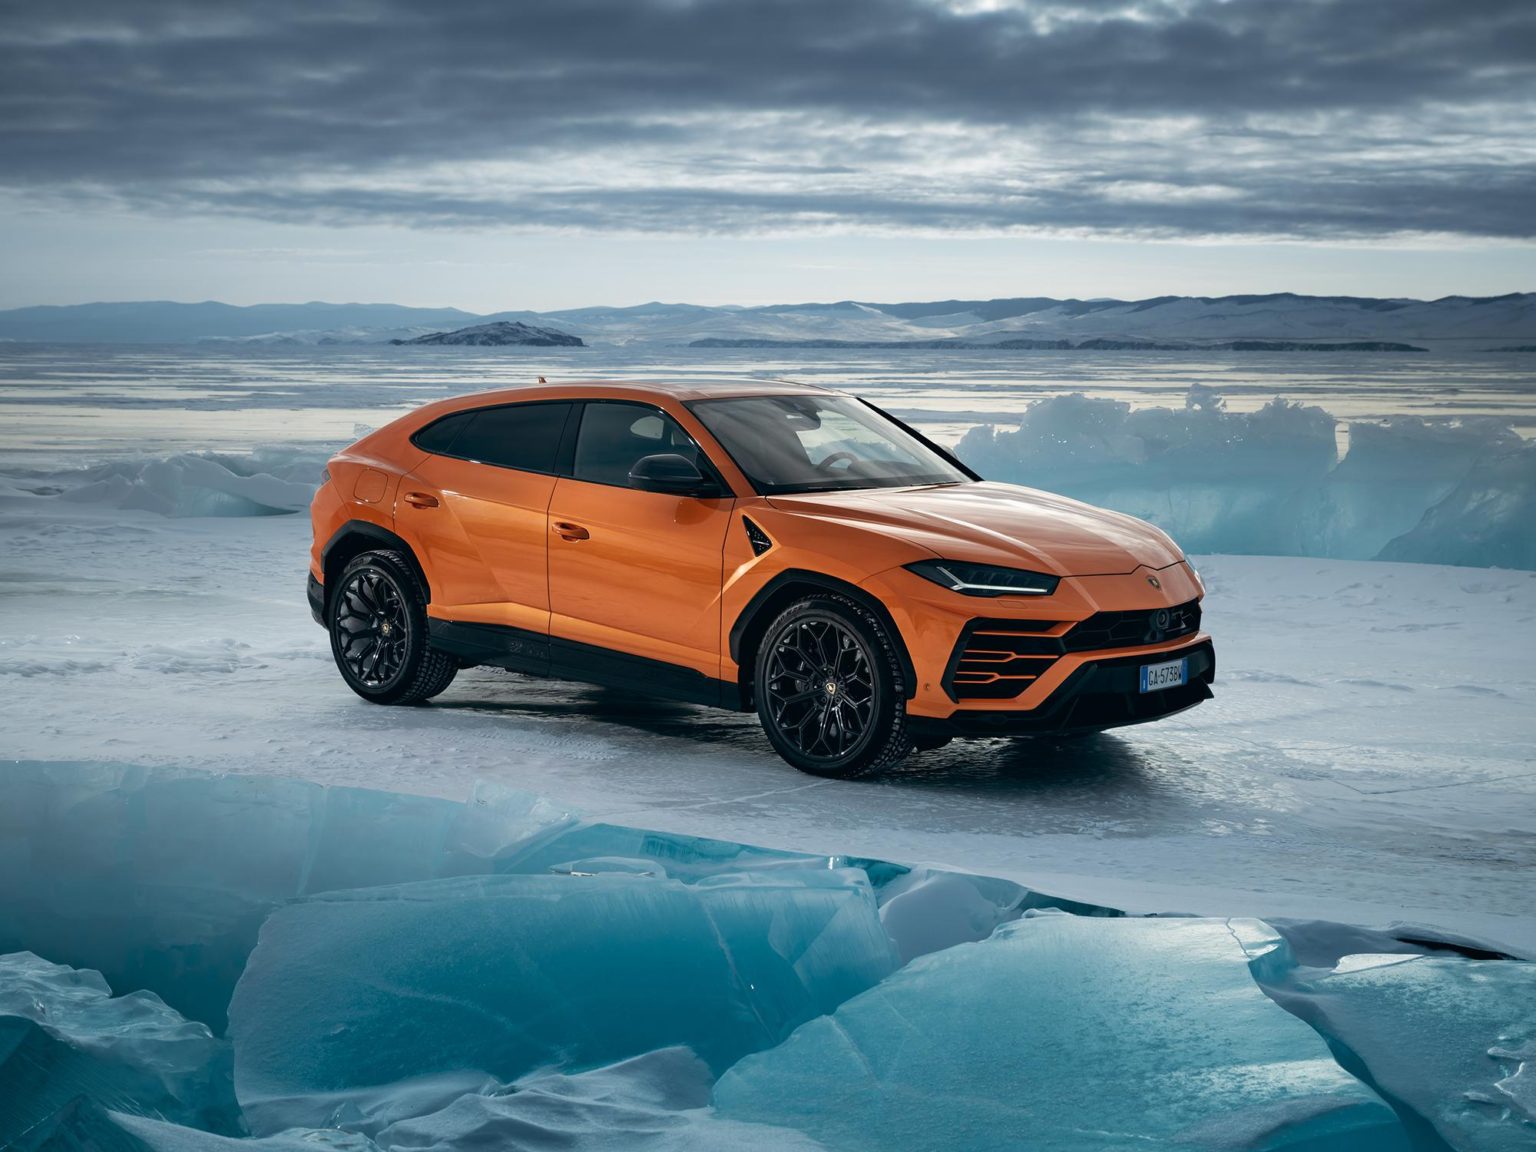 The 2021 Lamborghini Urus has six drive modes for on- and off-road driving.